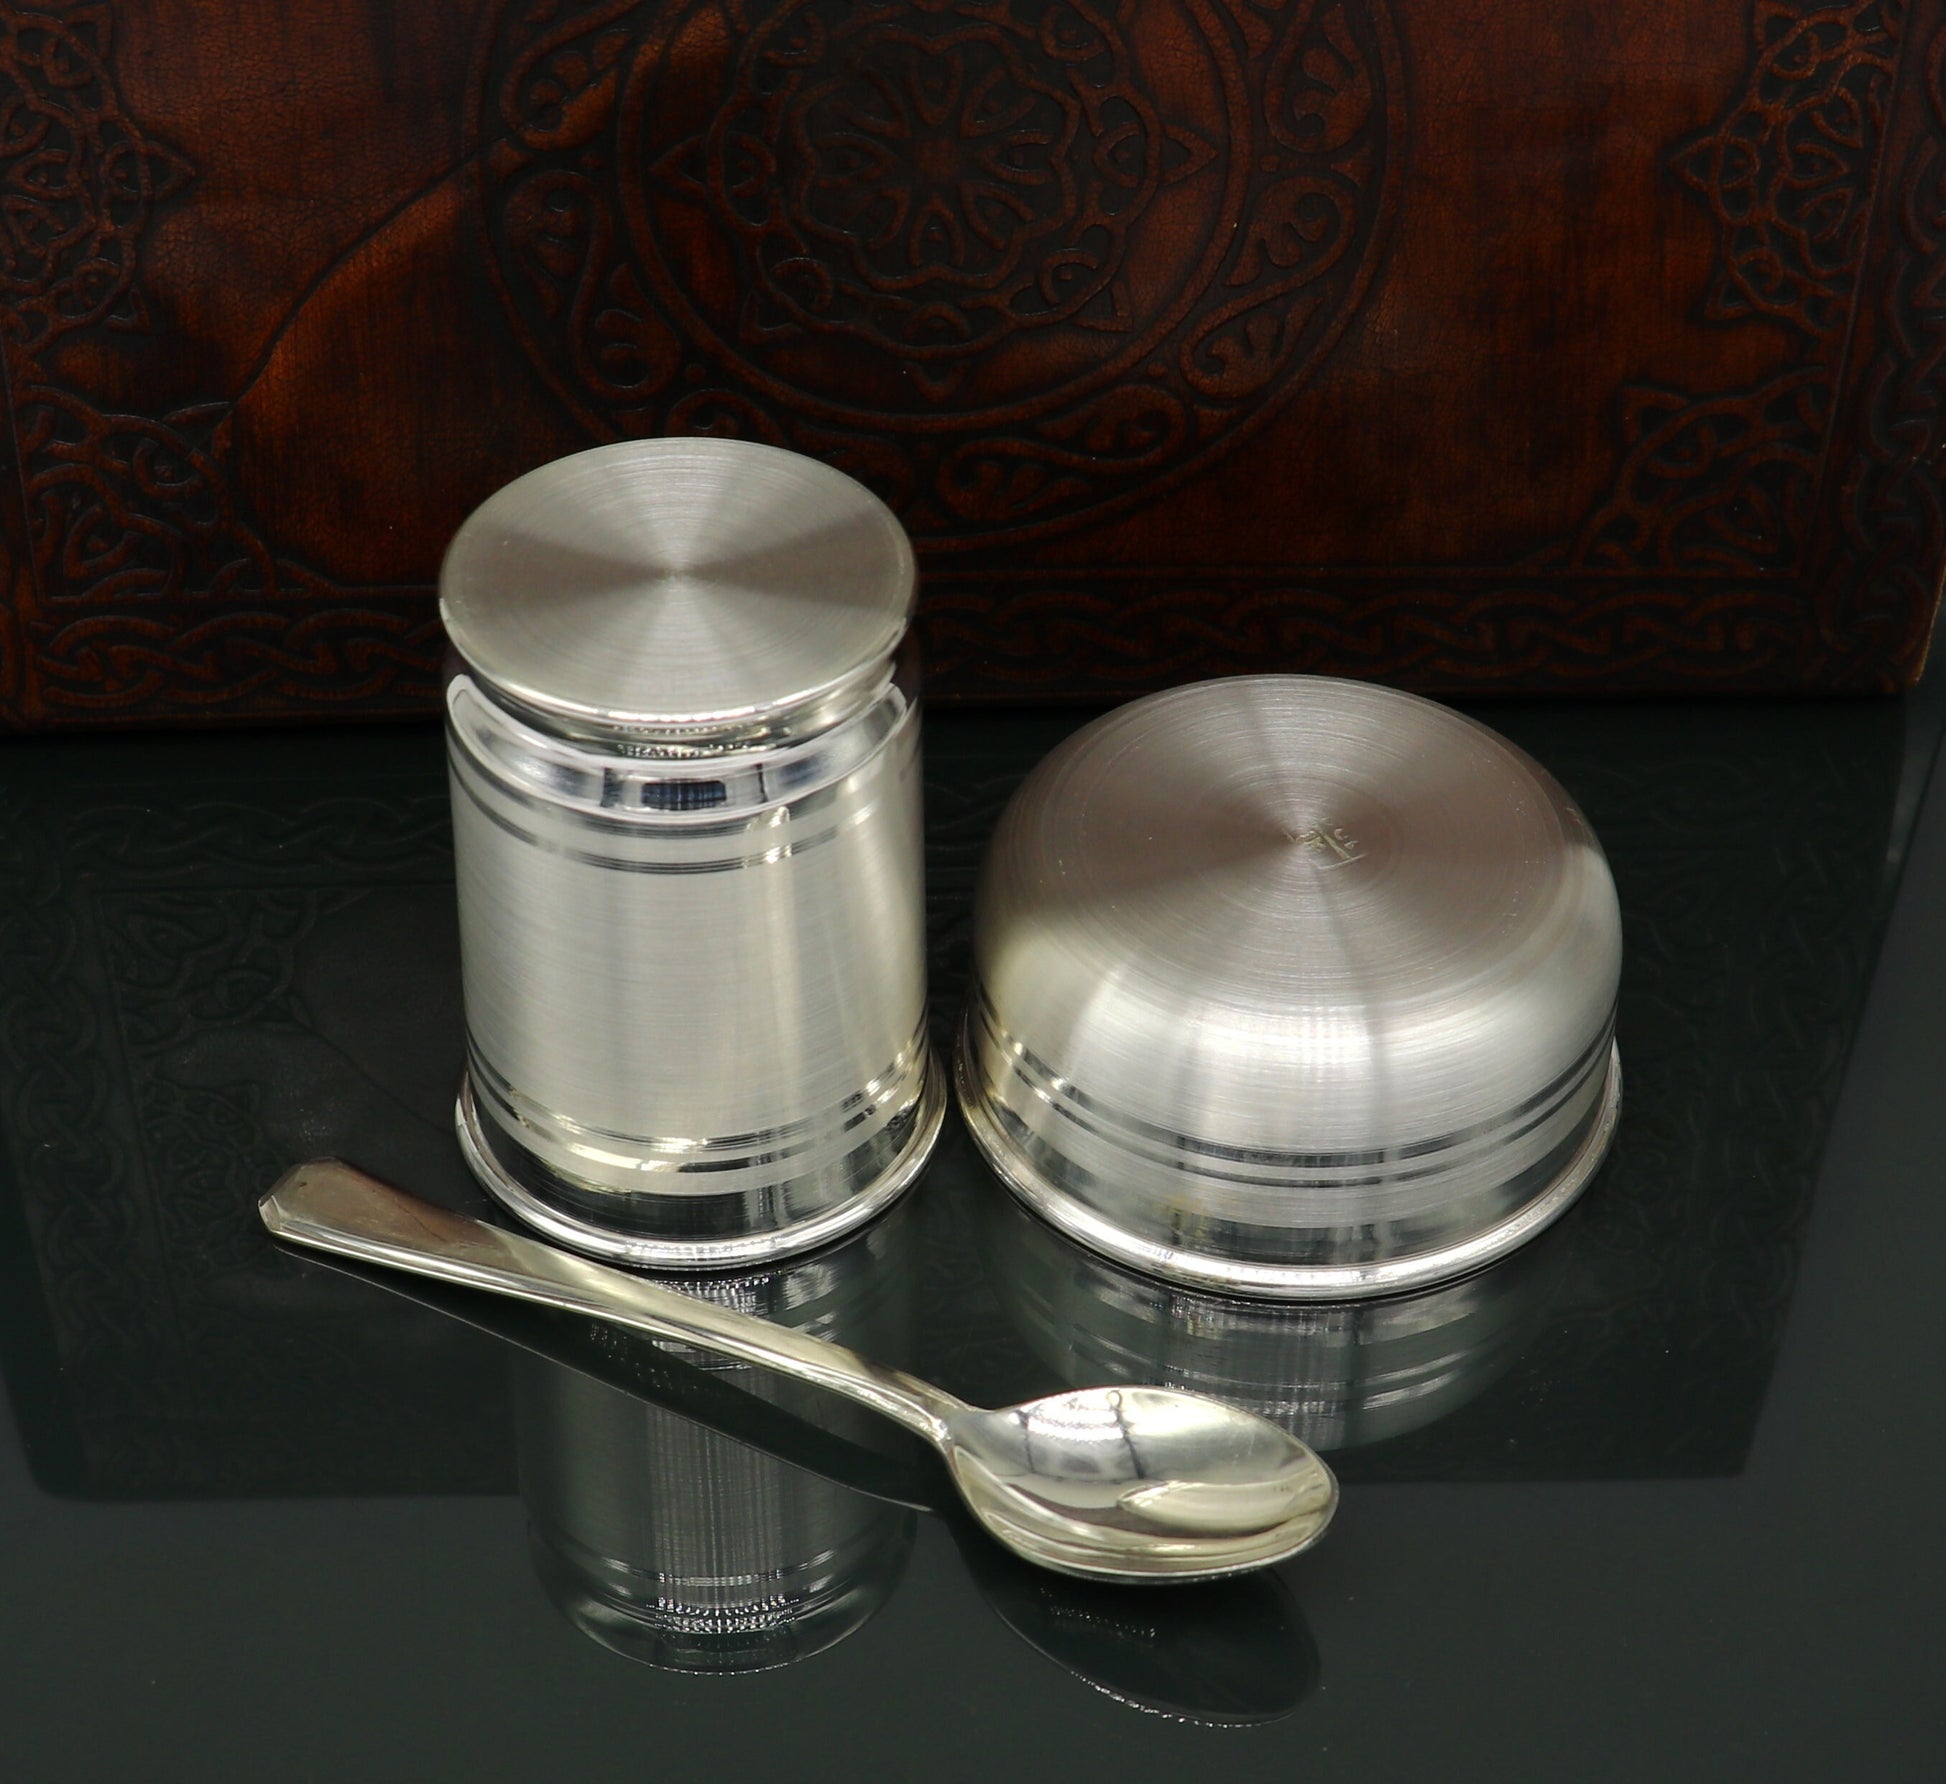 999 pure silver combo bowl and Water/milk tumbler, silver vessel, silver baby utensils, silver kids food article, gifting utensils sv138 - TRIBAL ORNAMENTS